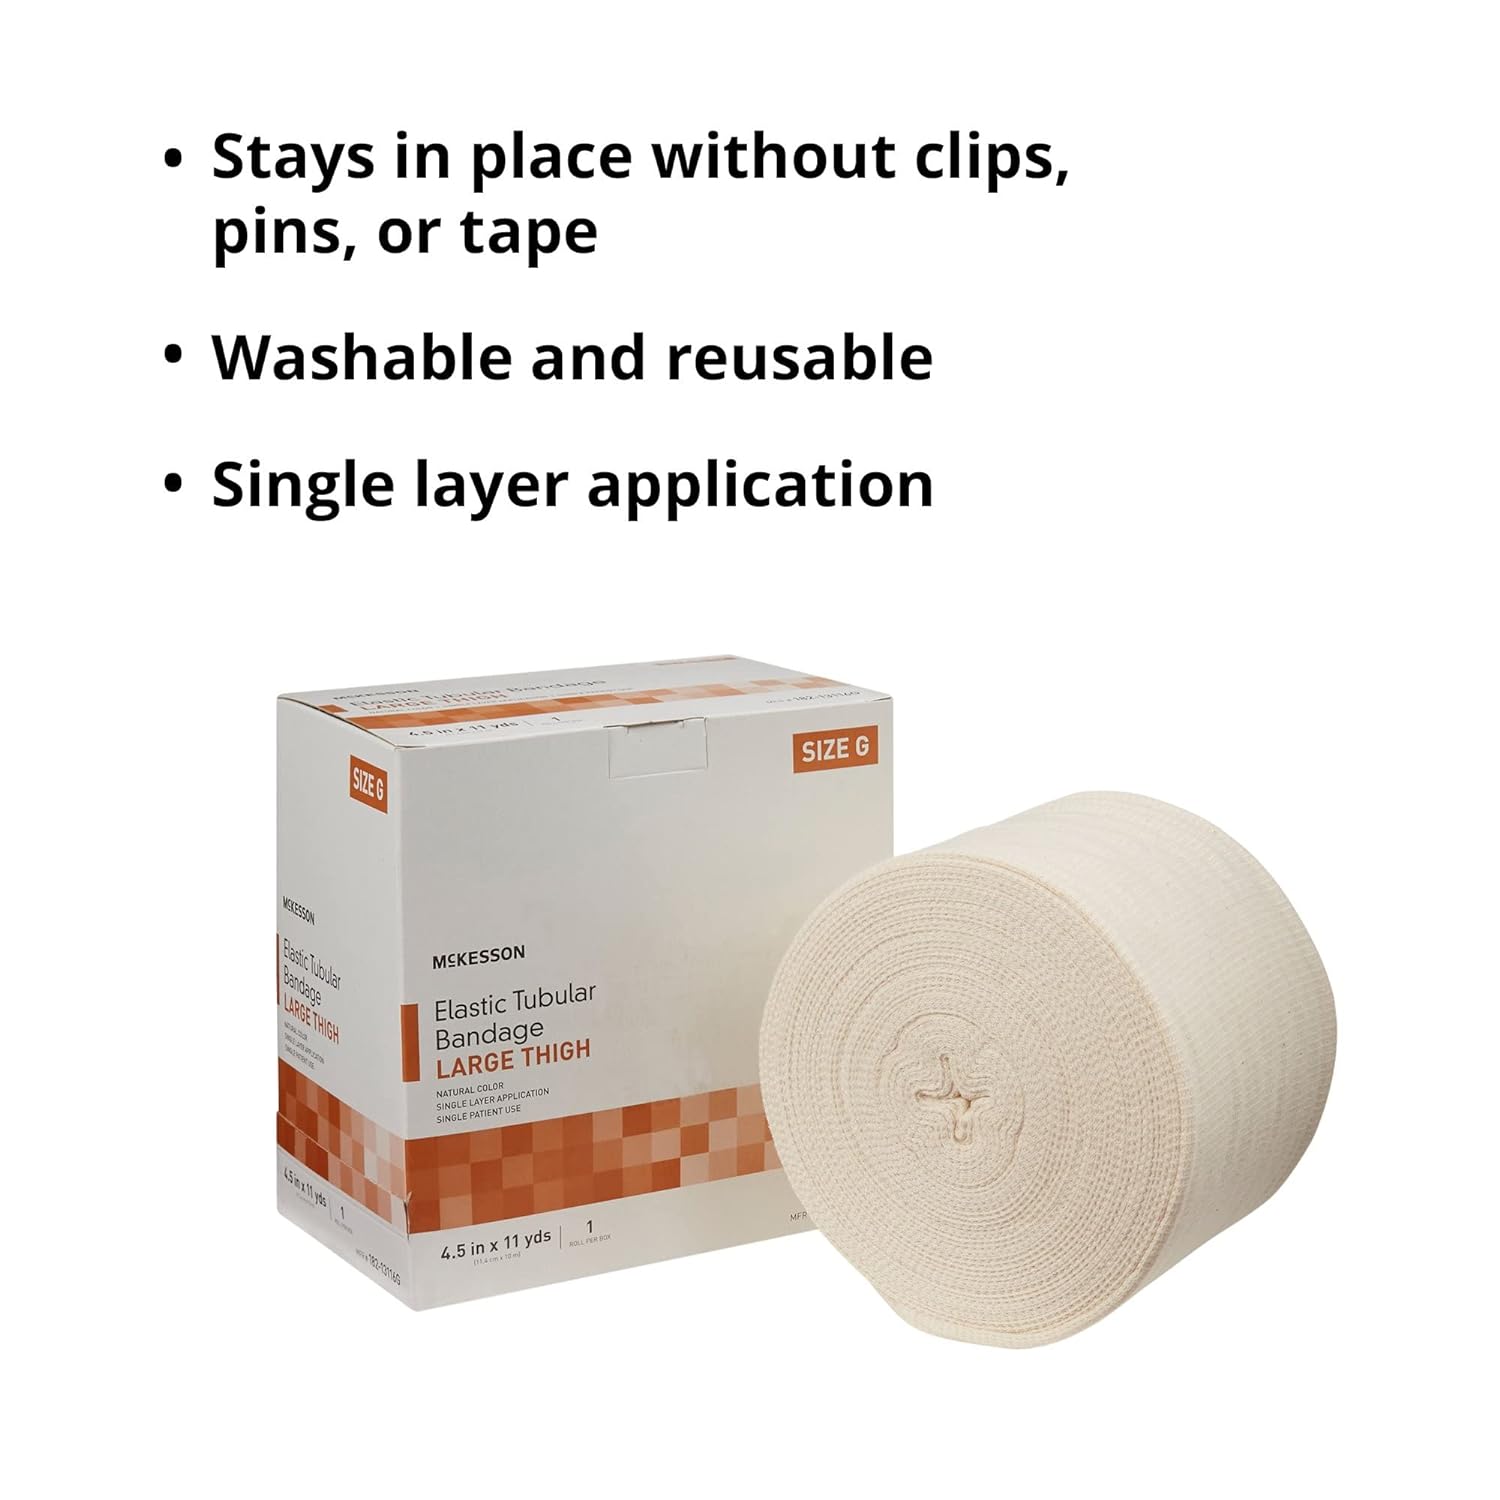 McKesson Spandagrip Tubular Bandage, Elastic Support with Compression - for Large Thighs, Size G, 4 1/2 in x 11 yd, 1 Count, 1 Pack